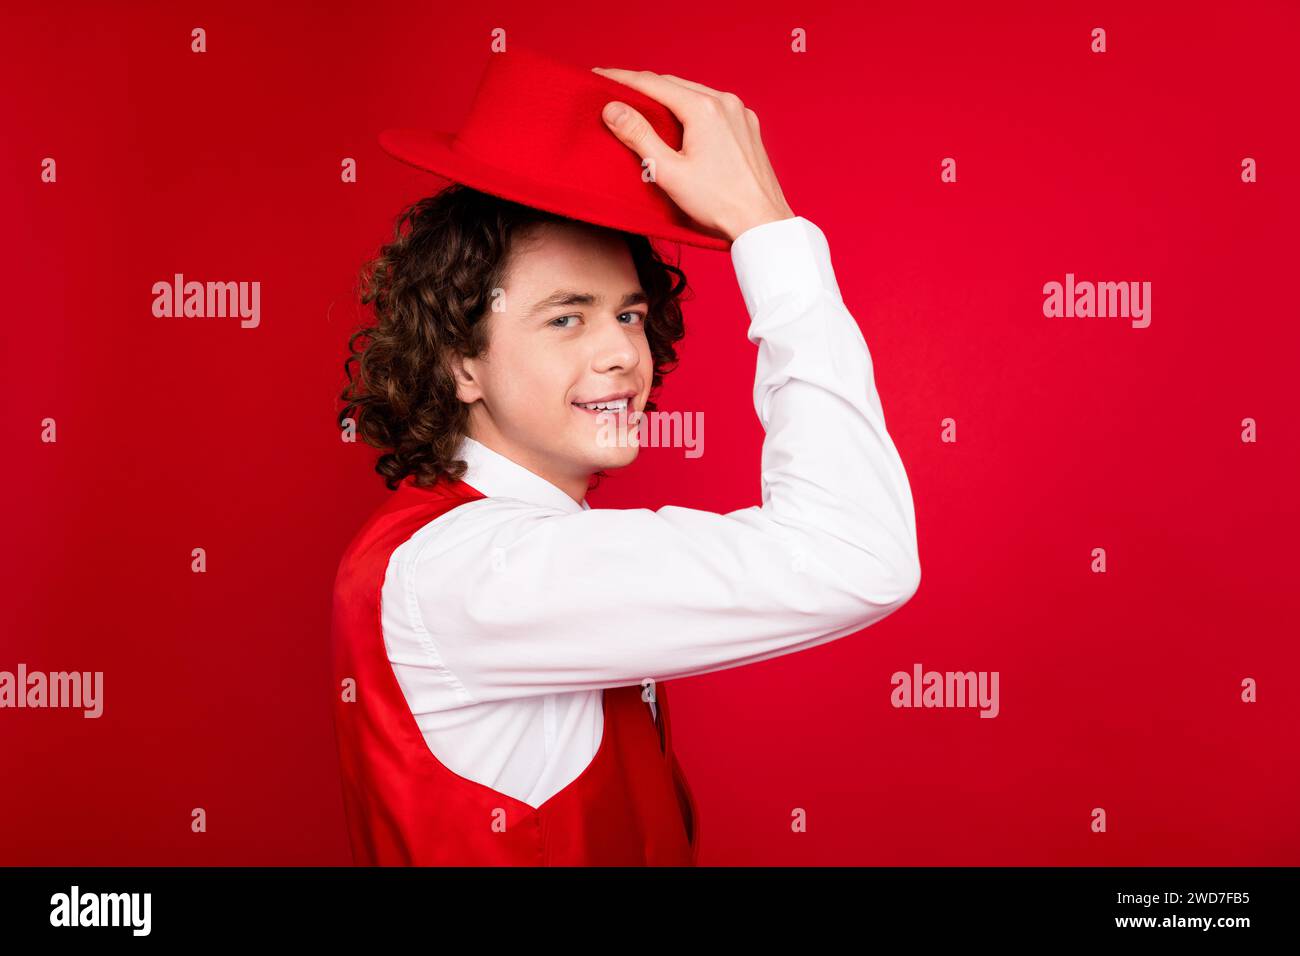 Closeup portrait of confident extravagant person teenager guy wearing shirt and vest touching hat isolated on red color background Stock Photo